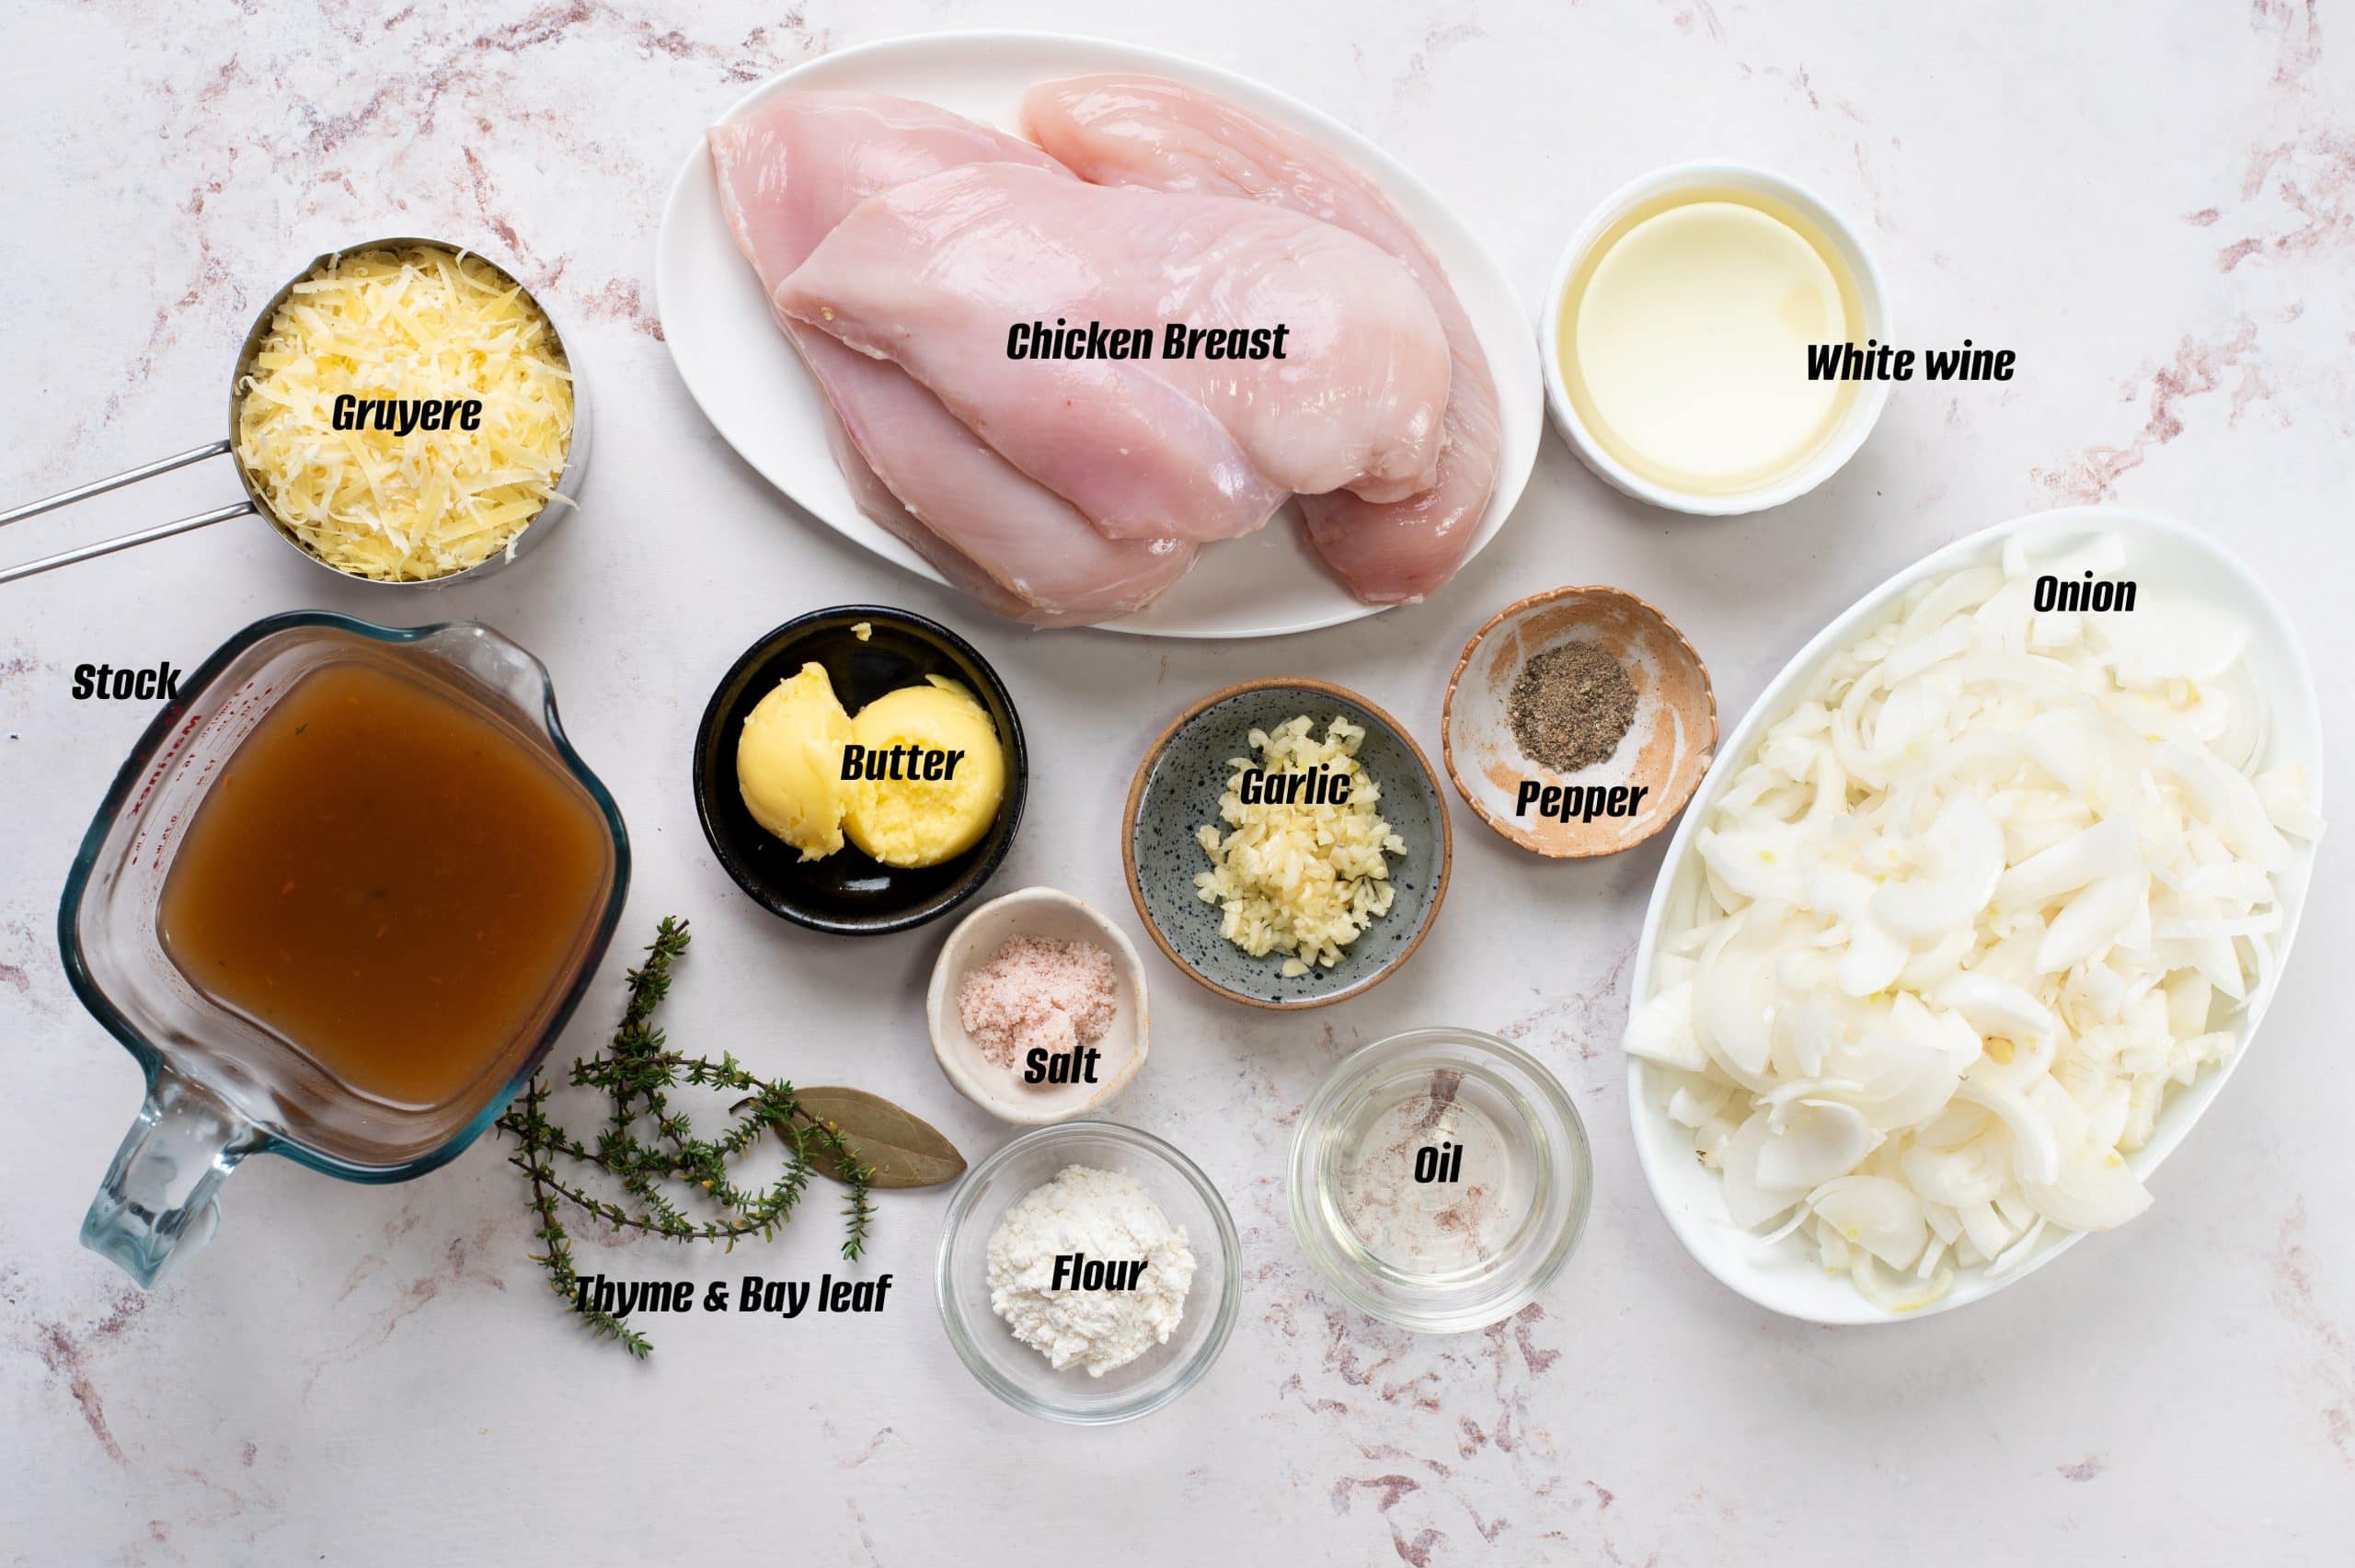 Ingredients to make French Onion Chicken